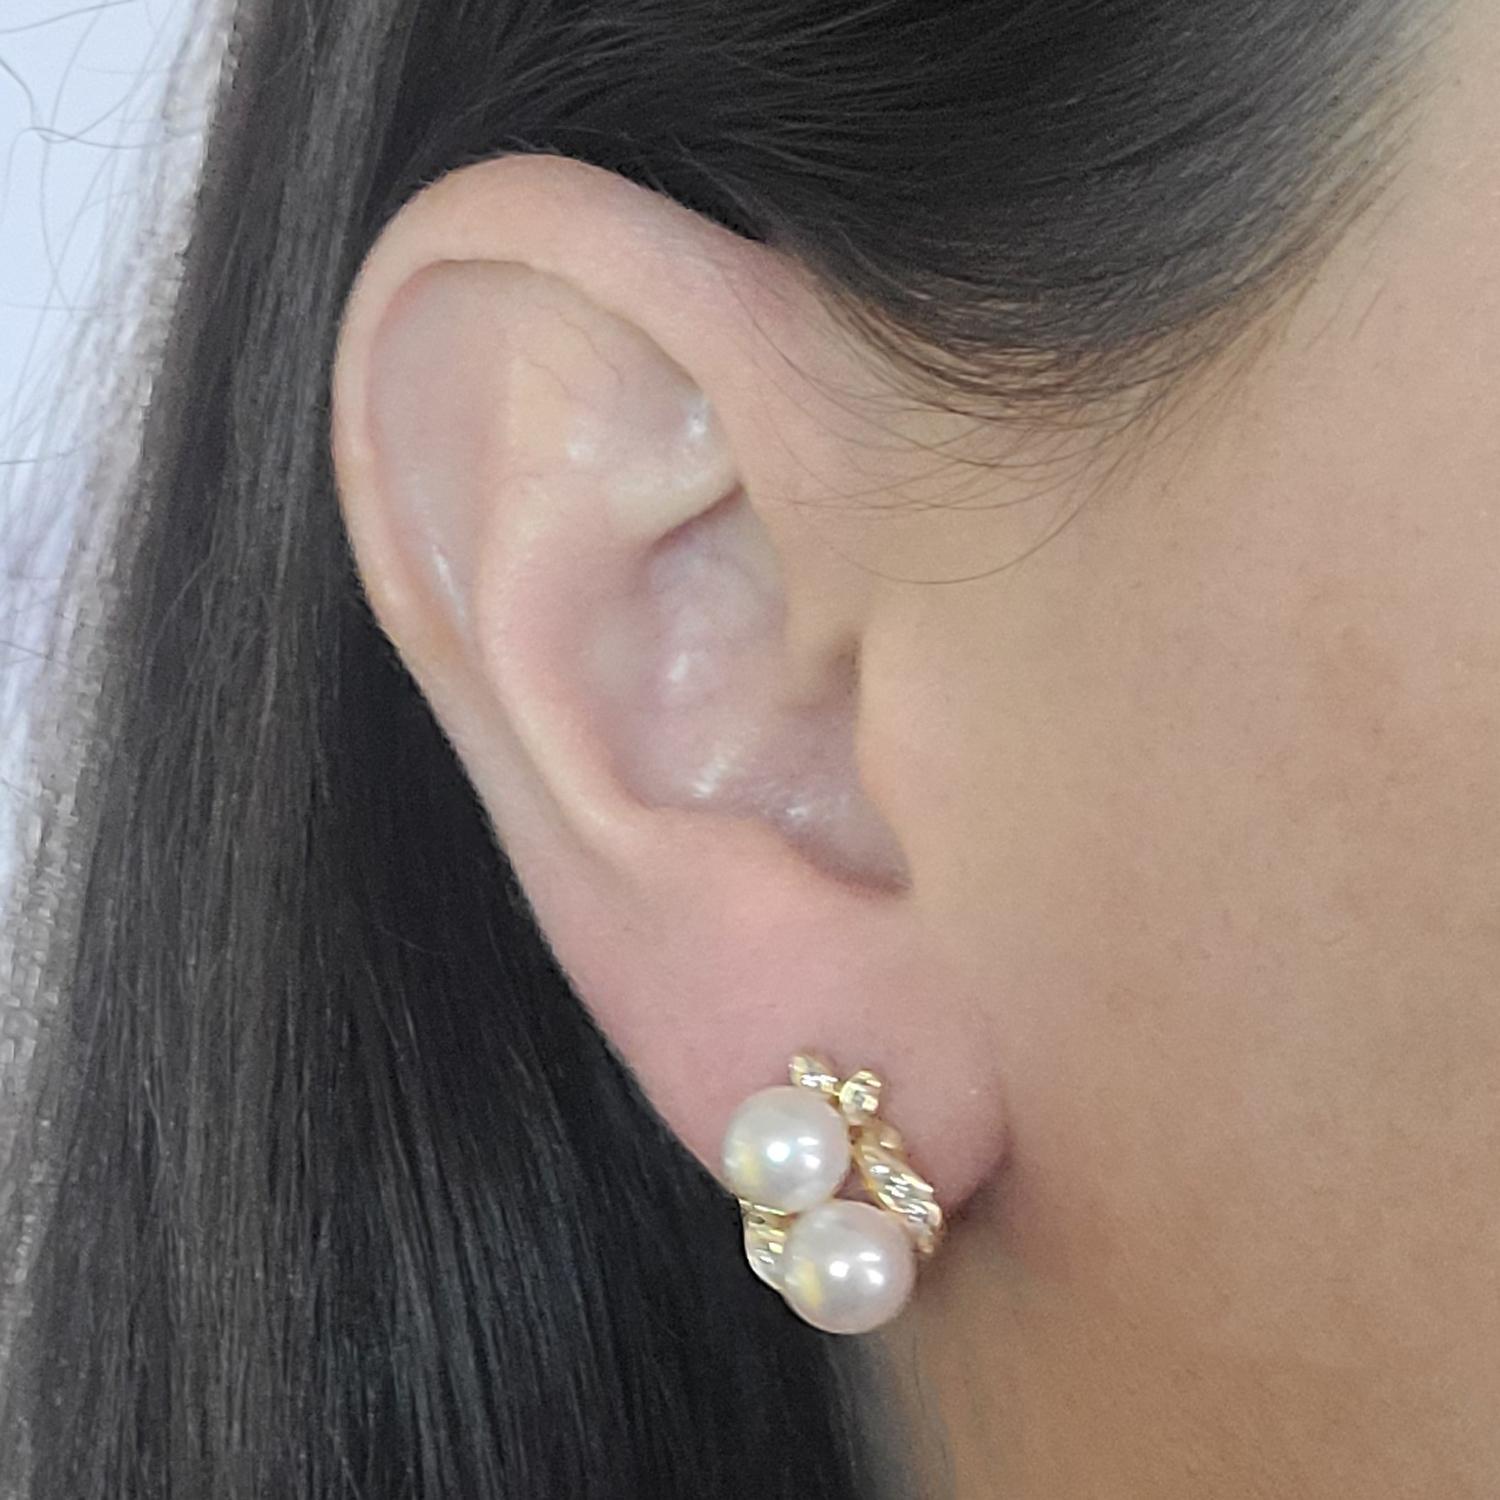 18 Karat Yellow Gold Earrings Featuring 4 Cultured Pearls Measuring 7mm and 20 Channel Set Round Brilliant Cut Diamonds of VS Clarity and G Color Totaling 0.25 Carats. Pierced Post with Omega Clip Back. Post Removed Upon Request. Finished Weight is